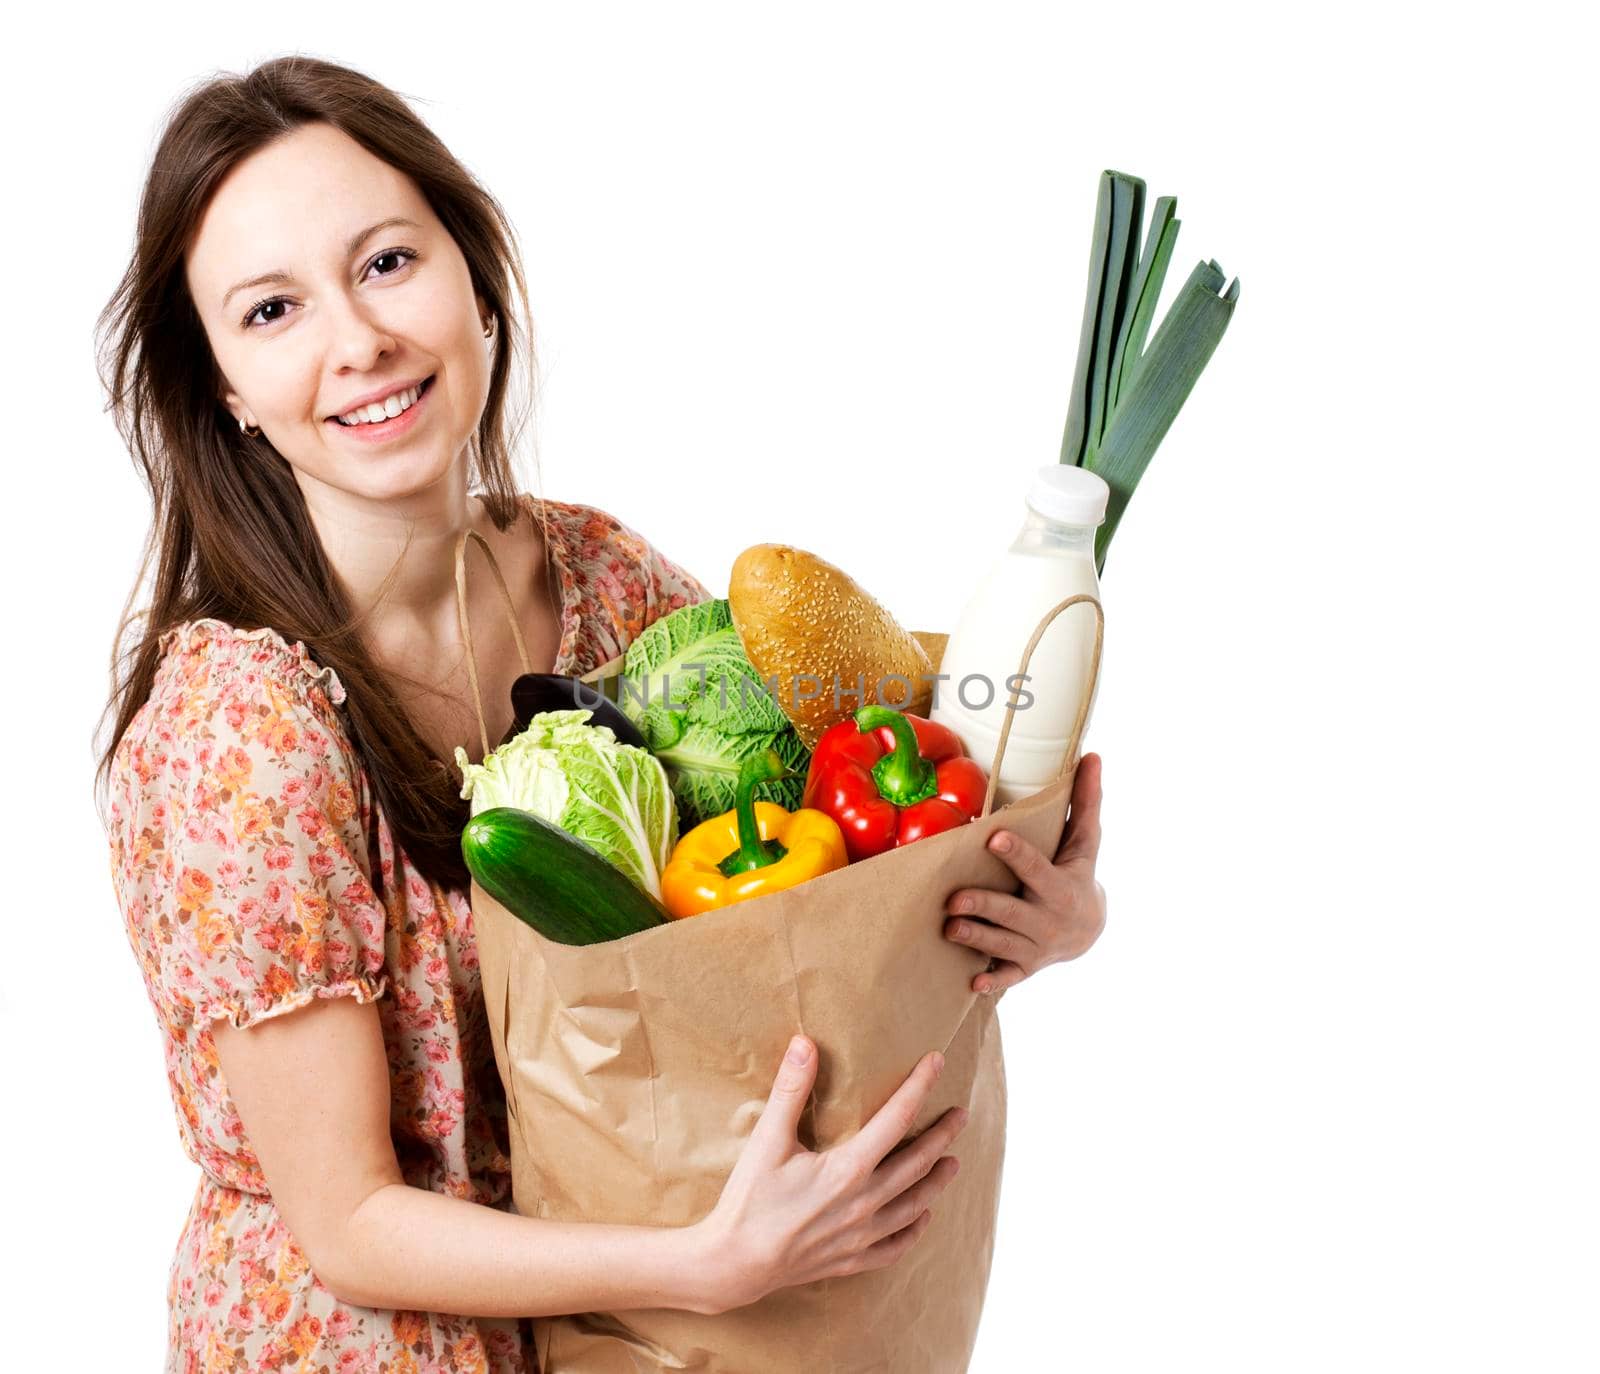 Happy Young Woman Holding Large Bag of Healthly Groceries - Stock Image. Isolated on white